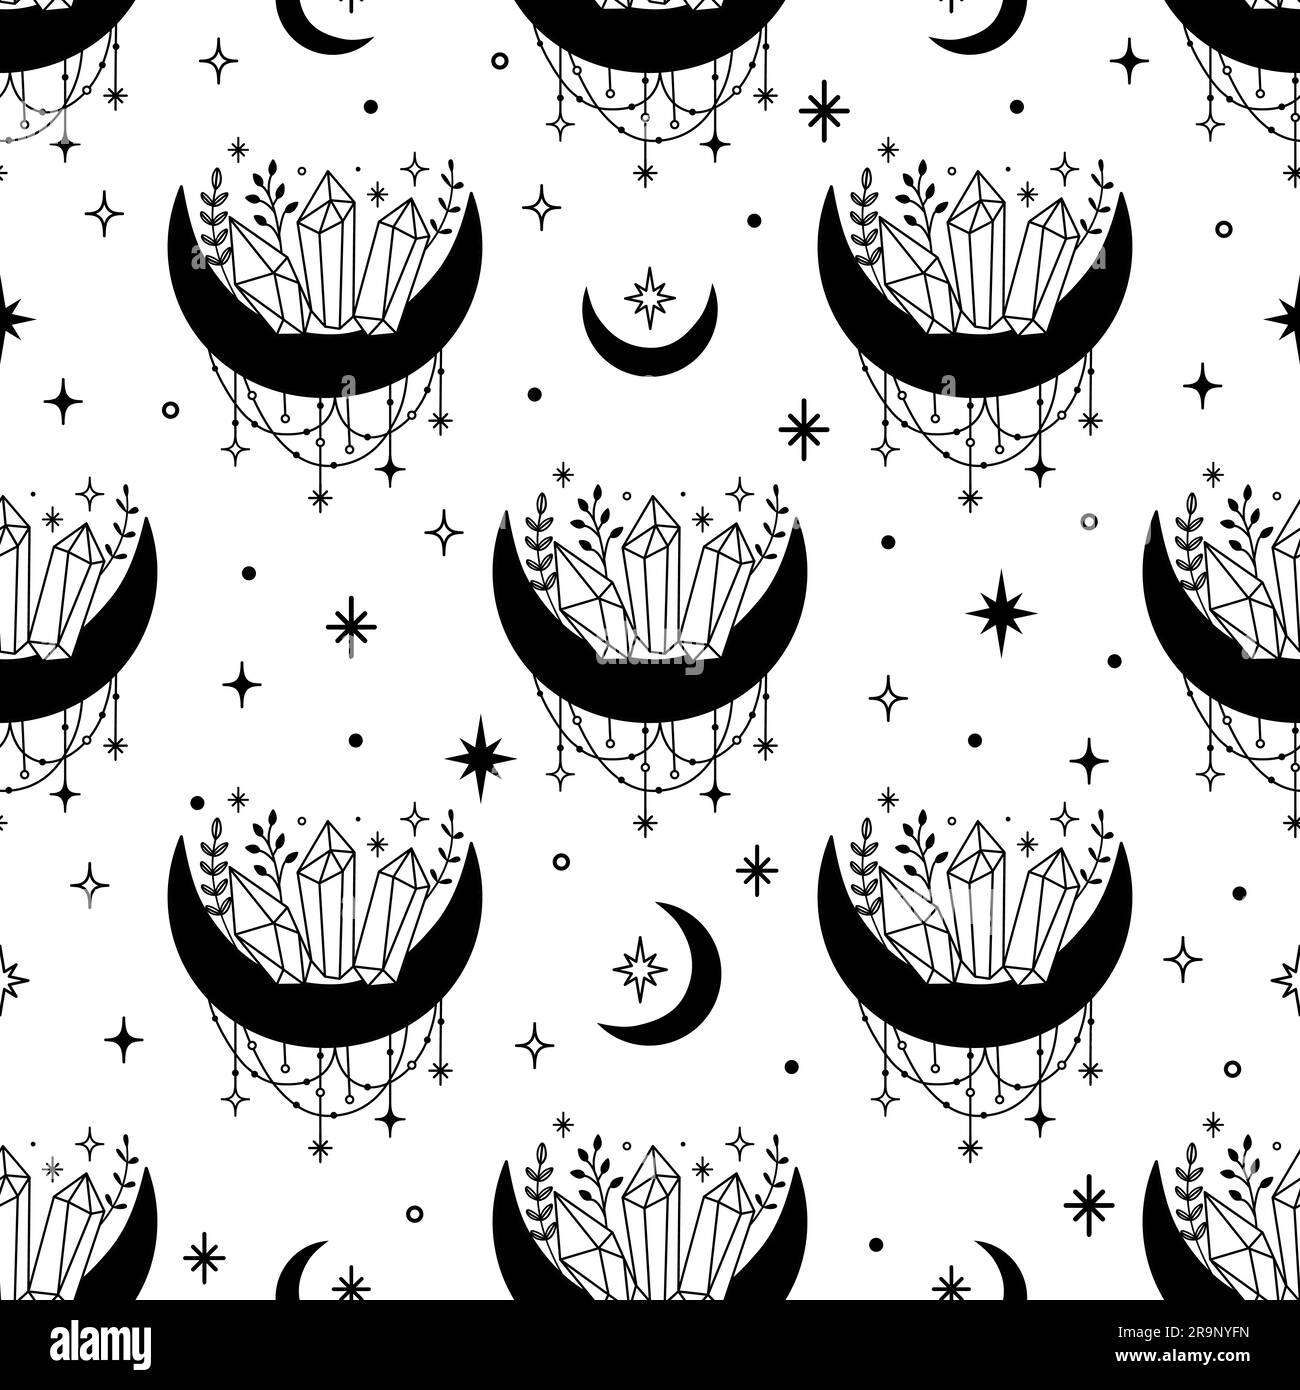 Vector magic celestial seamless pattern with moon, stars and mystic crystals. Boho abstract esoteric background with witchcraft symbols for fashion, f Stock Vector